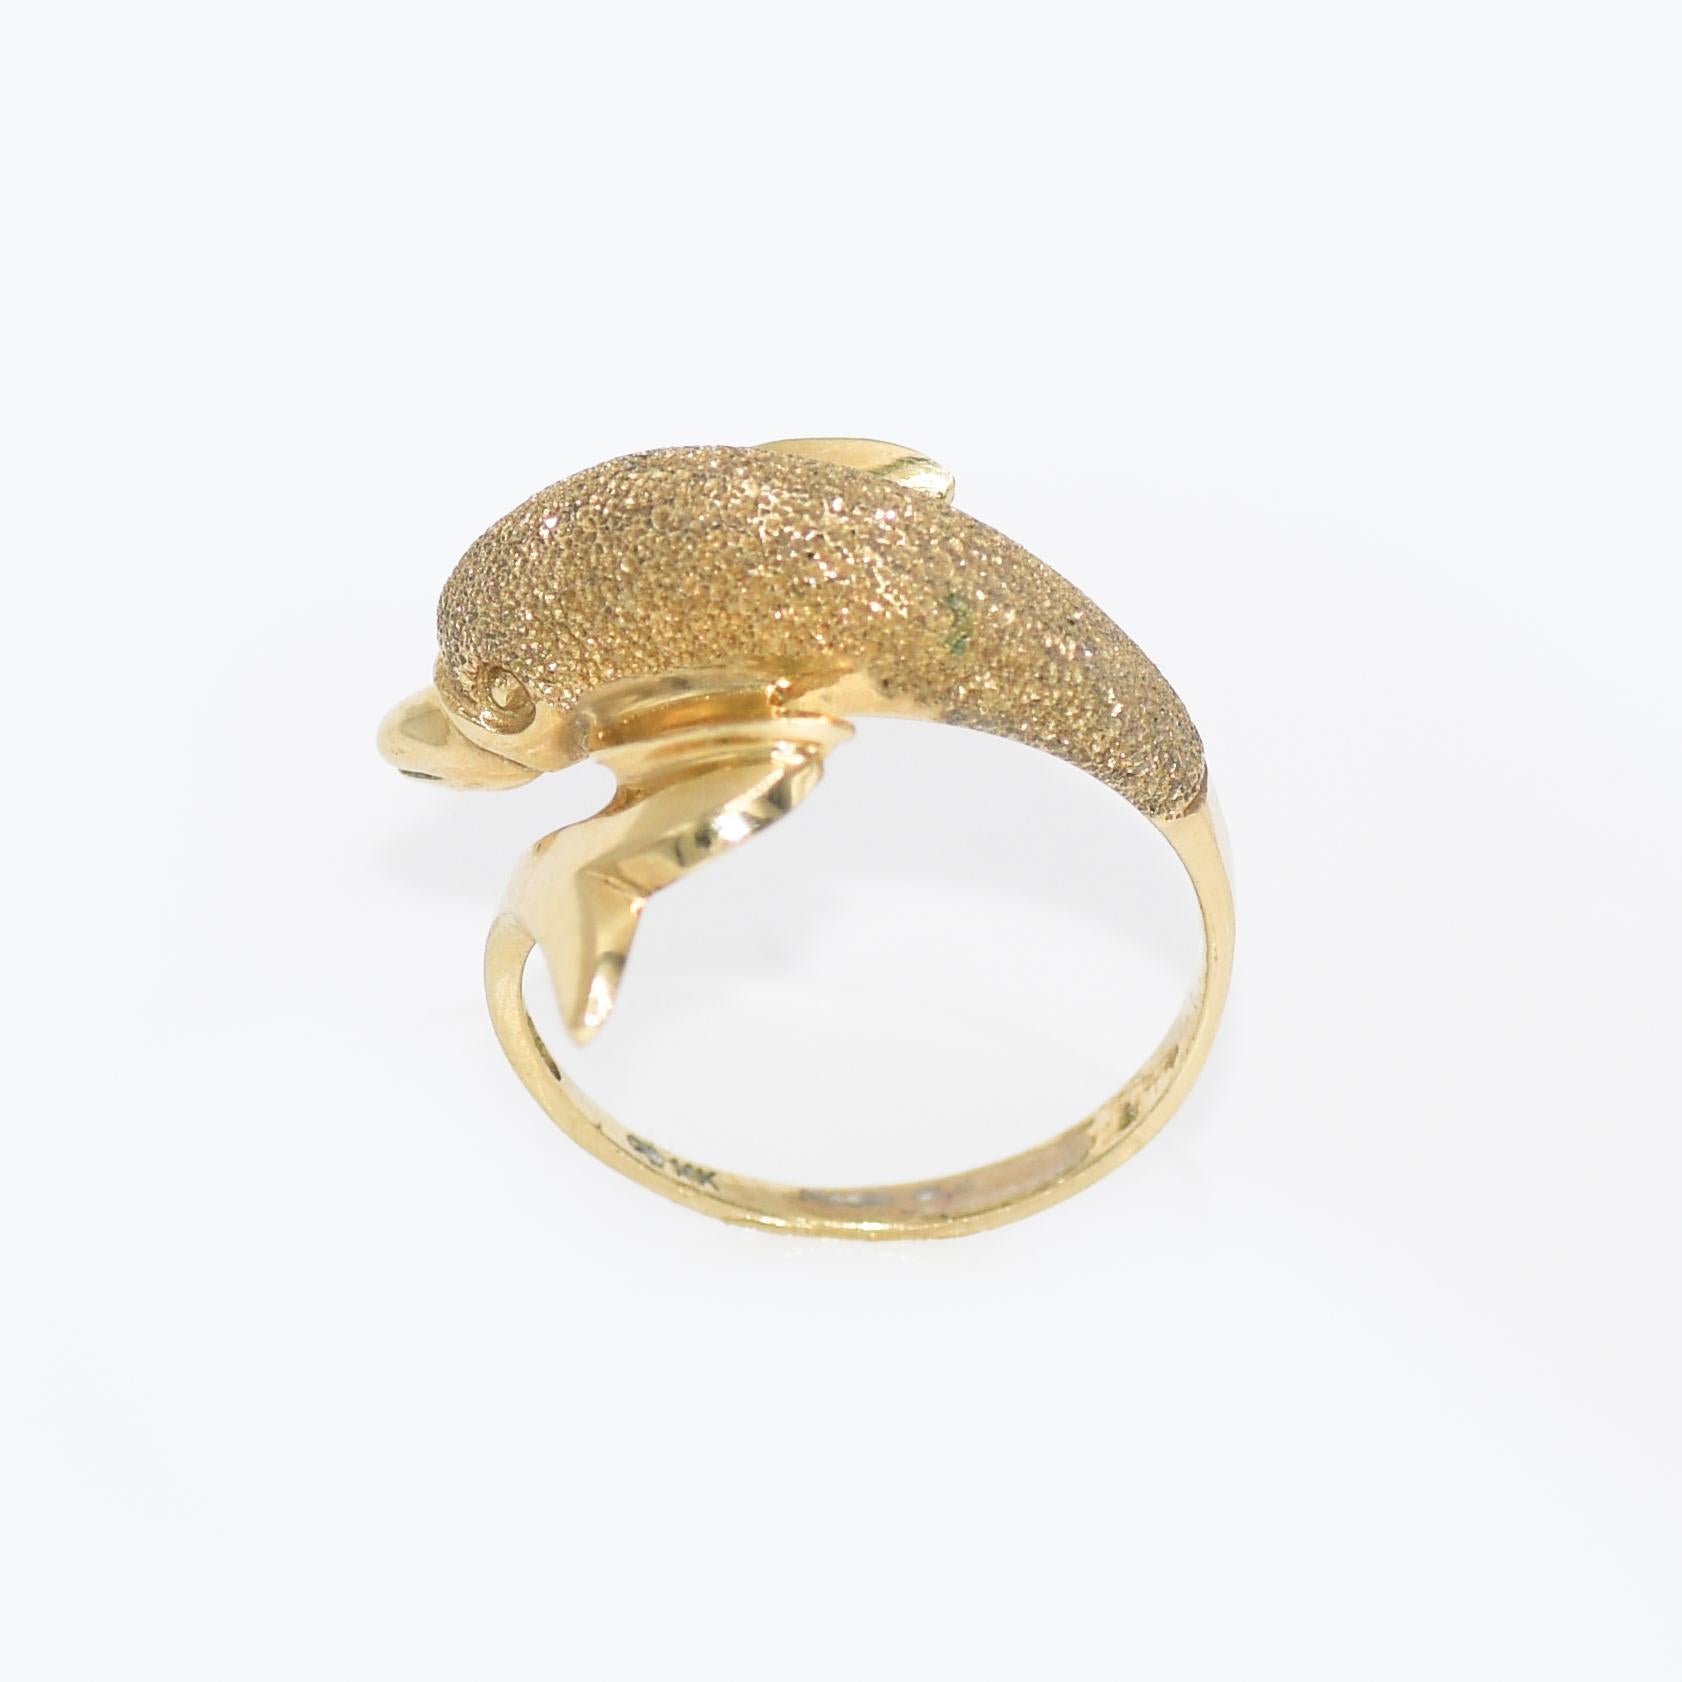 14k Yellow Gold Dolphin Ring 3.8g
The dolphin has a textured finish, and is 20.5mm in width.
Stamped and tests 14k, weighs 3.8gr
Size 7 1/4. Can be sized up or down one size for additional fee.
